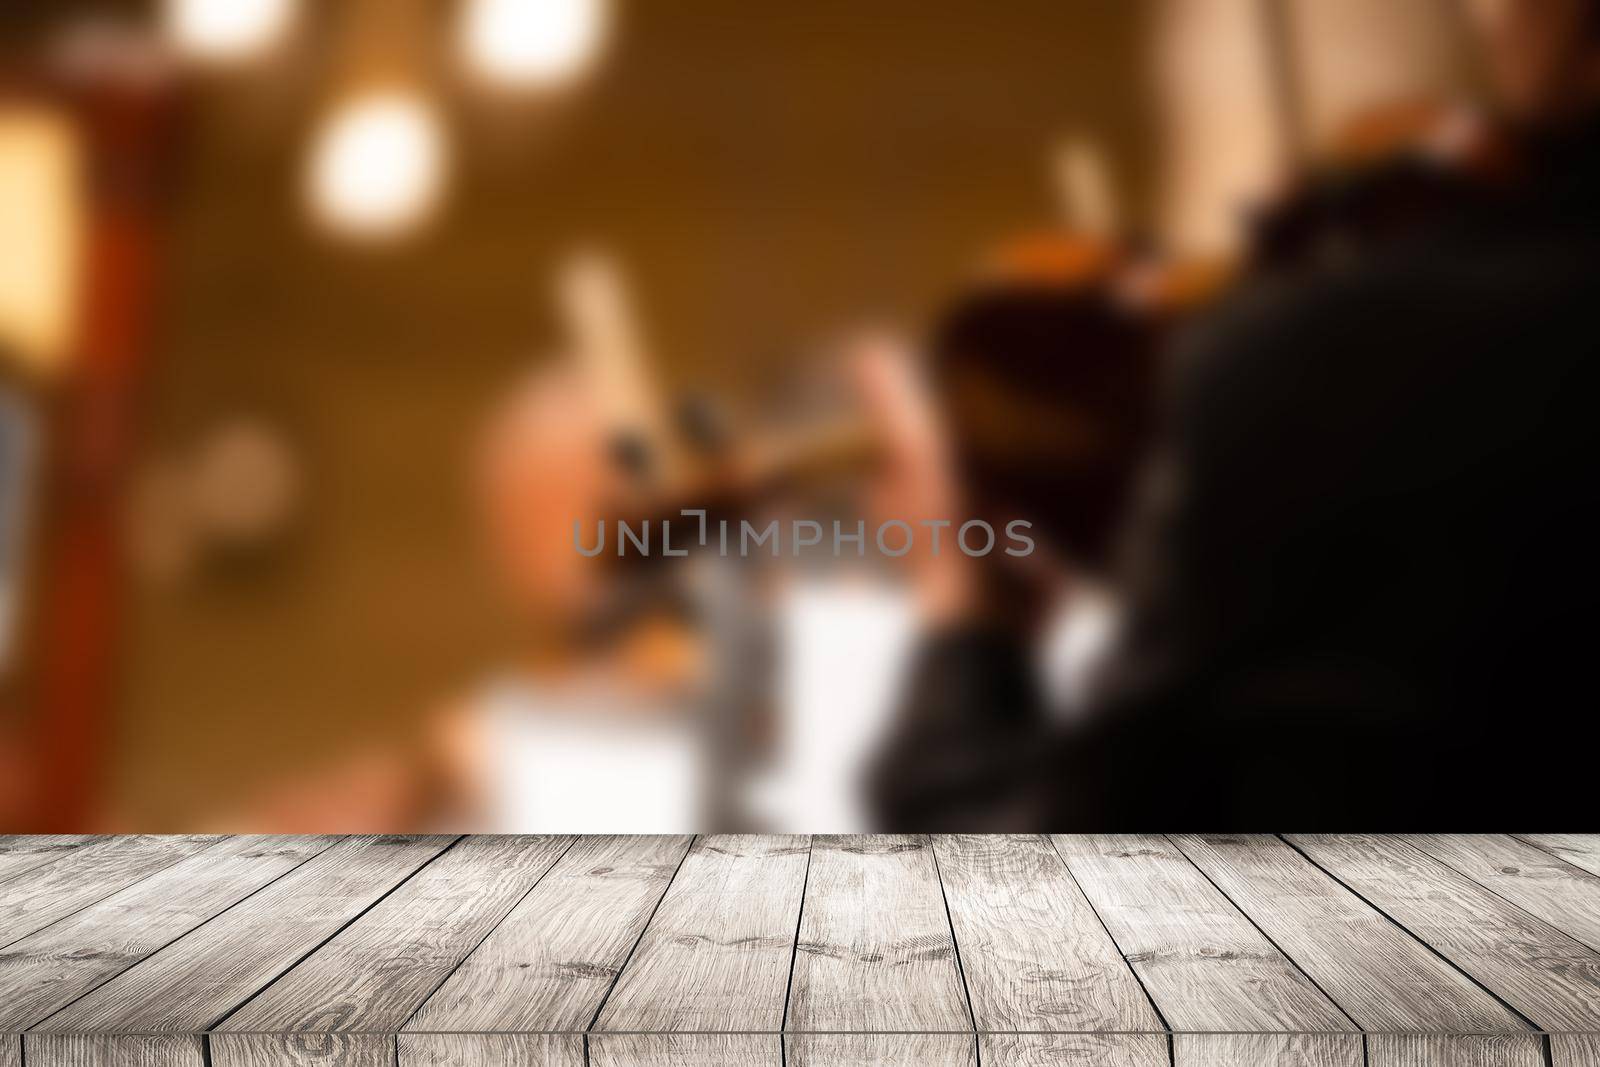 empty wooden floor or wooden terrace with abstract night light bokeh of night festival, blurred background, copy space for display of product or object presentation, vintage color tone.